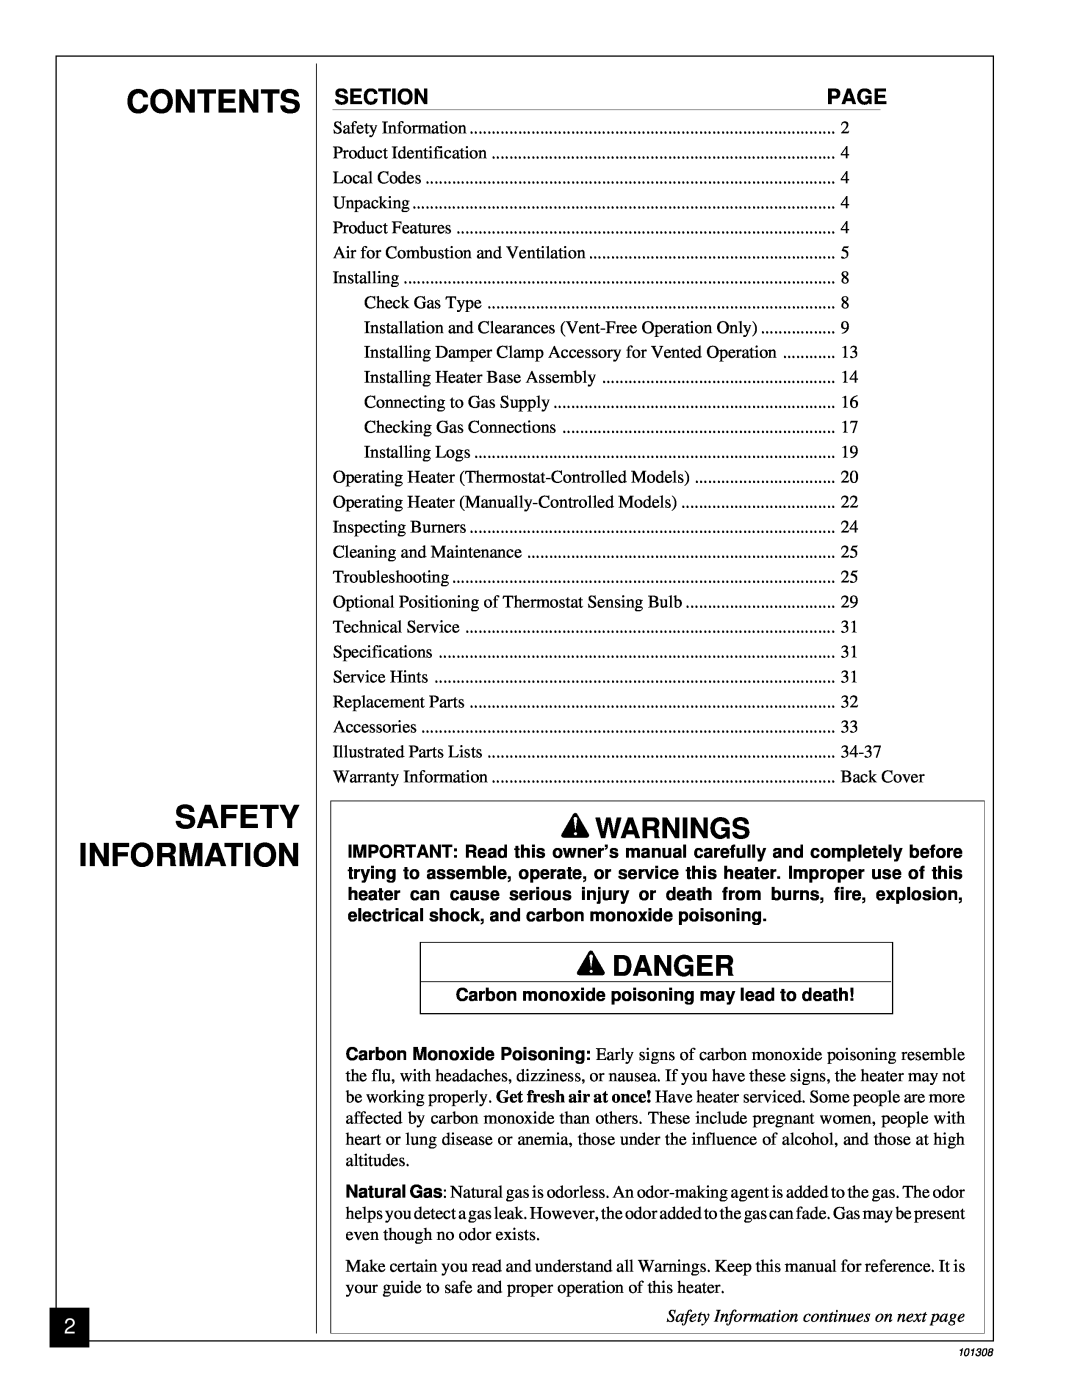 Desa NATURAL GAS LOG HEATER Contents Safety Information, Warnings, Danger, Carbon monoxide poisoning may lead to death 